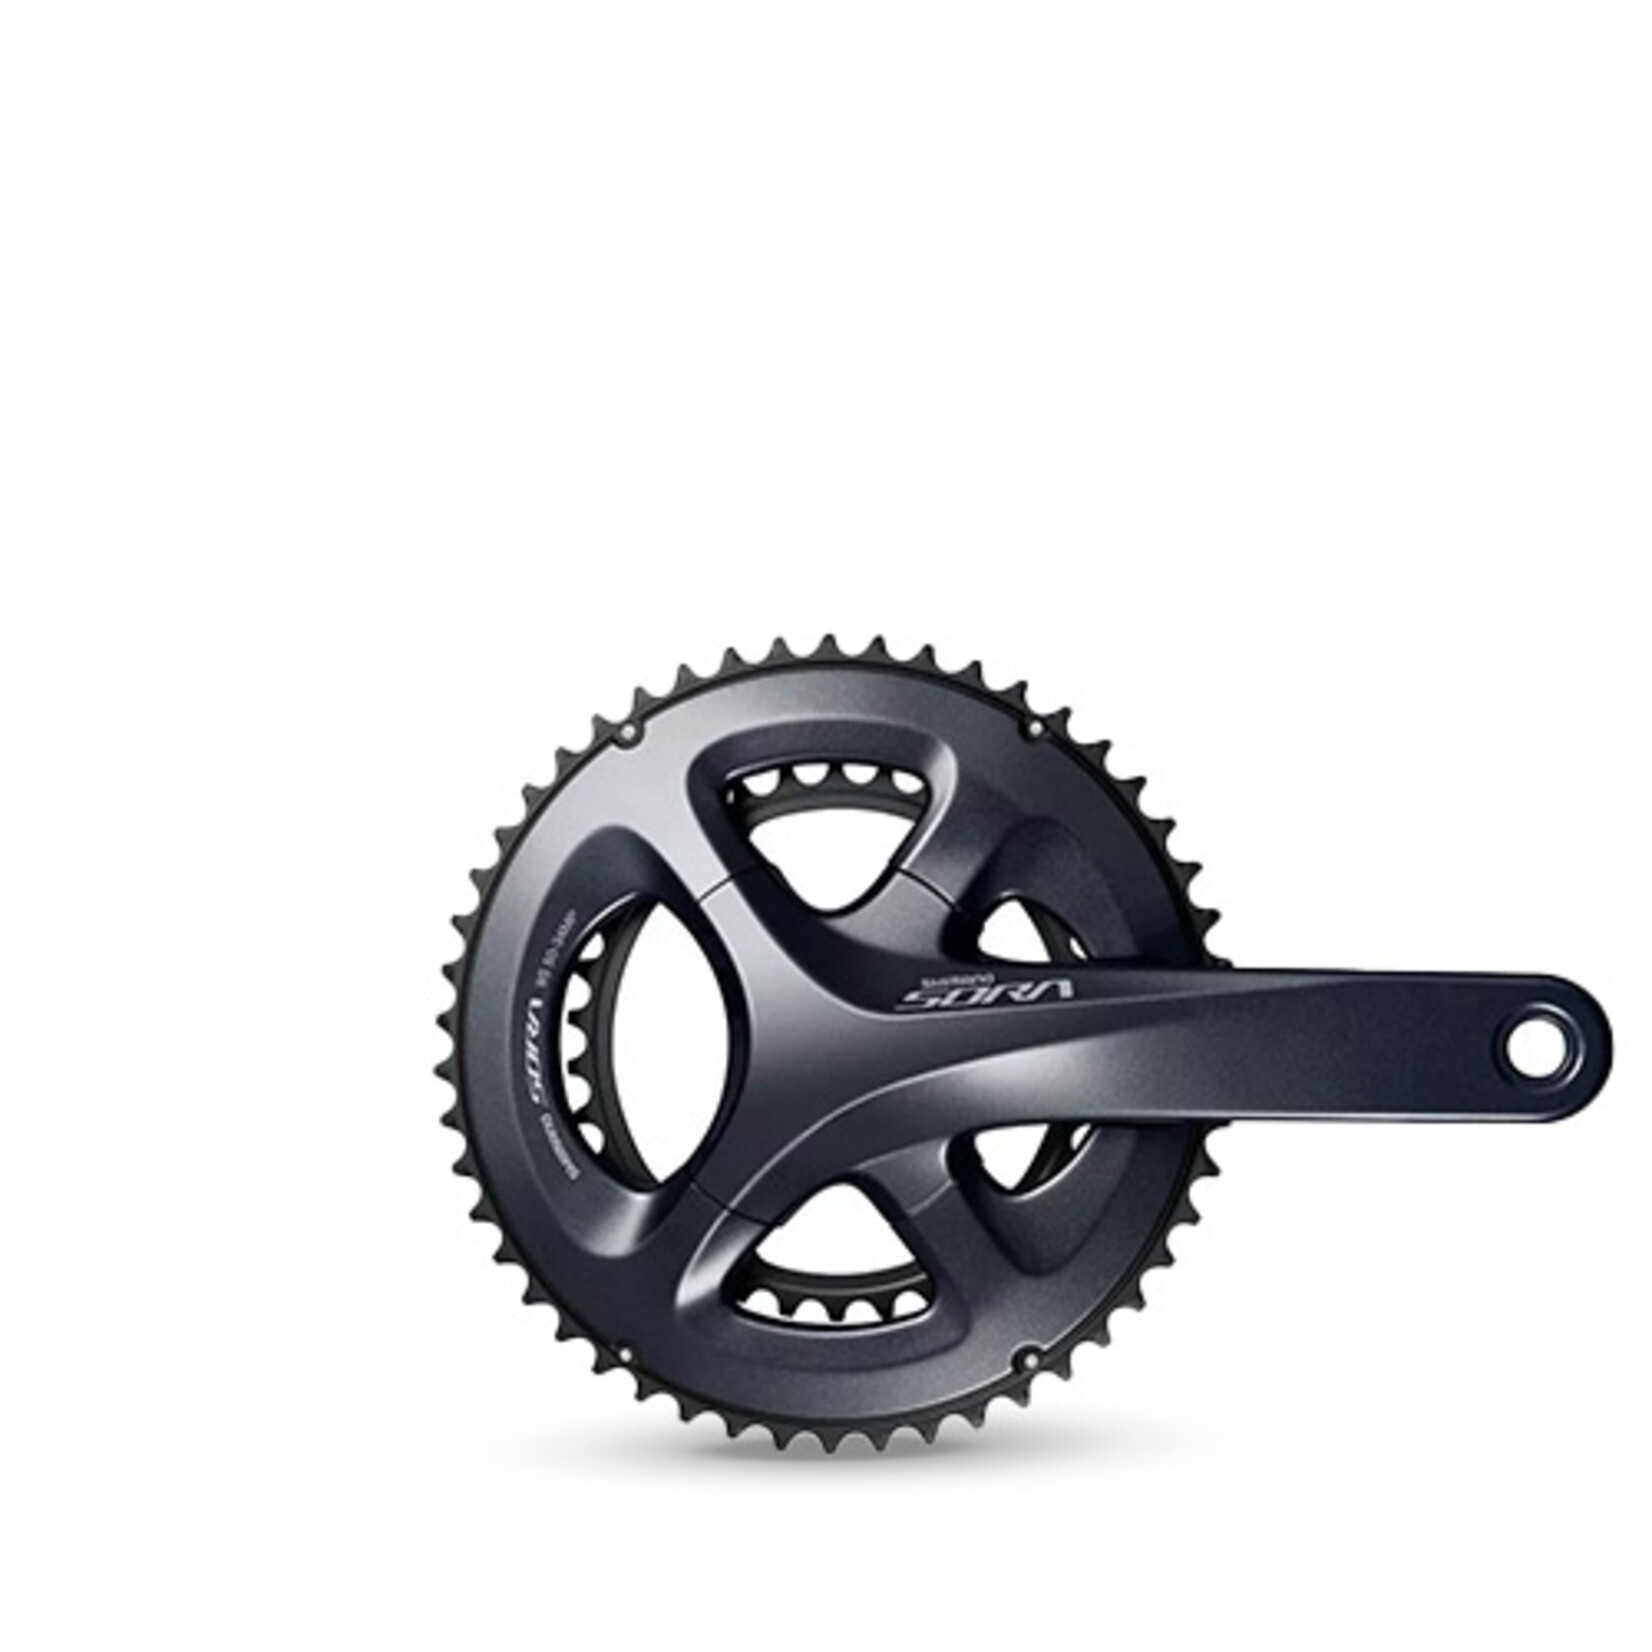 Shimano SHIMANO FC-R3000 SORA DOUBLE CHAINSET 9 SPEED